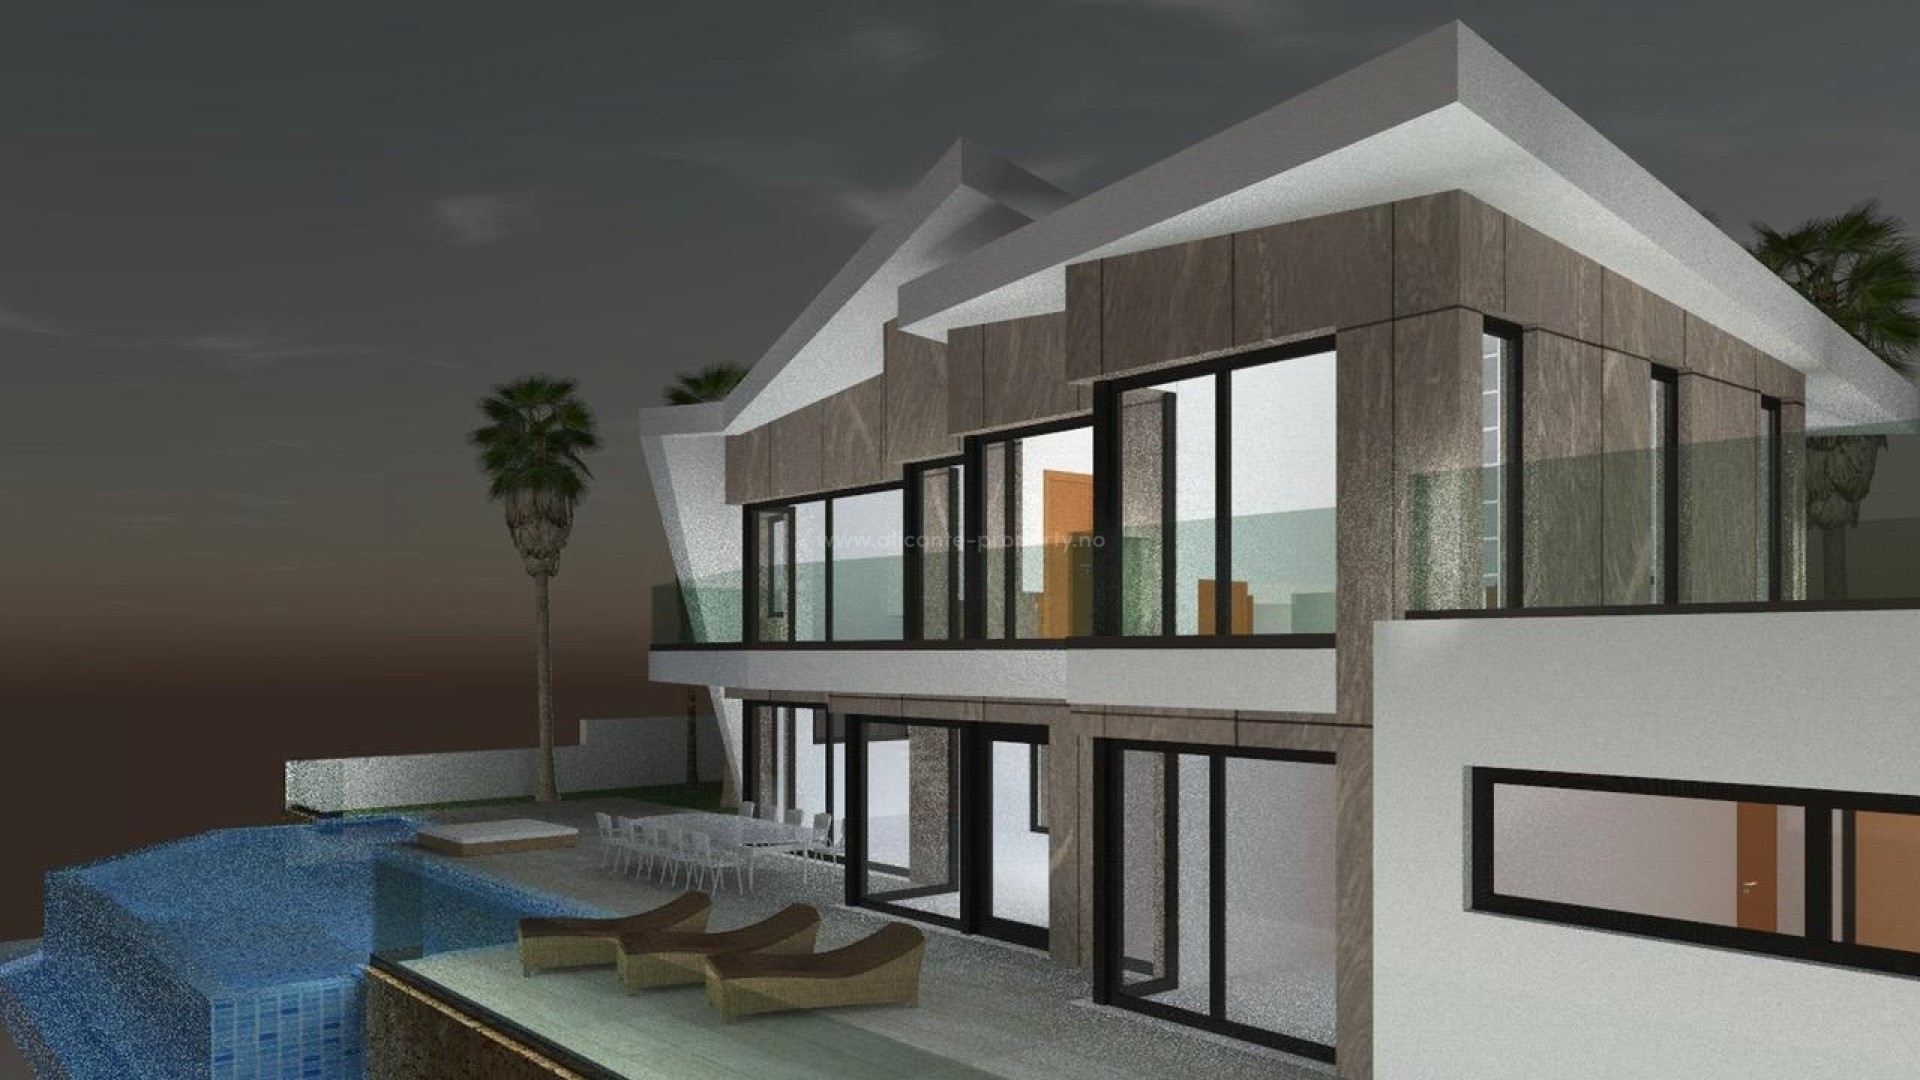 New built luxury villa with sea view in Calpe, 4 bedrooms, 5 bathrooms, private garden with pool. Close to the beach and the cities of Altea, Benidorm, Teulada-Moraira, Benissa